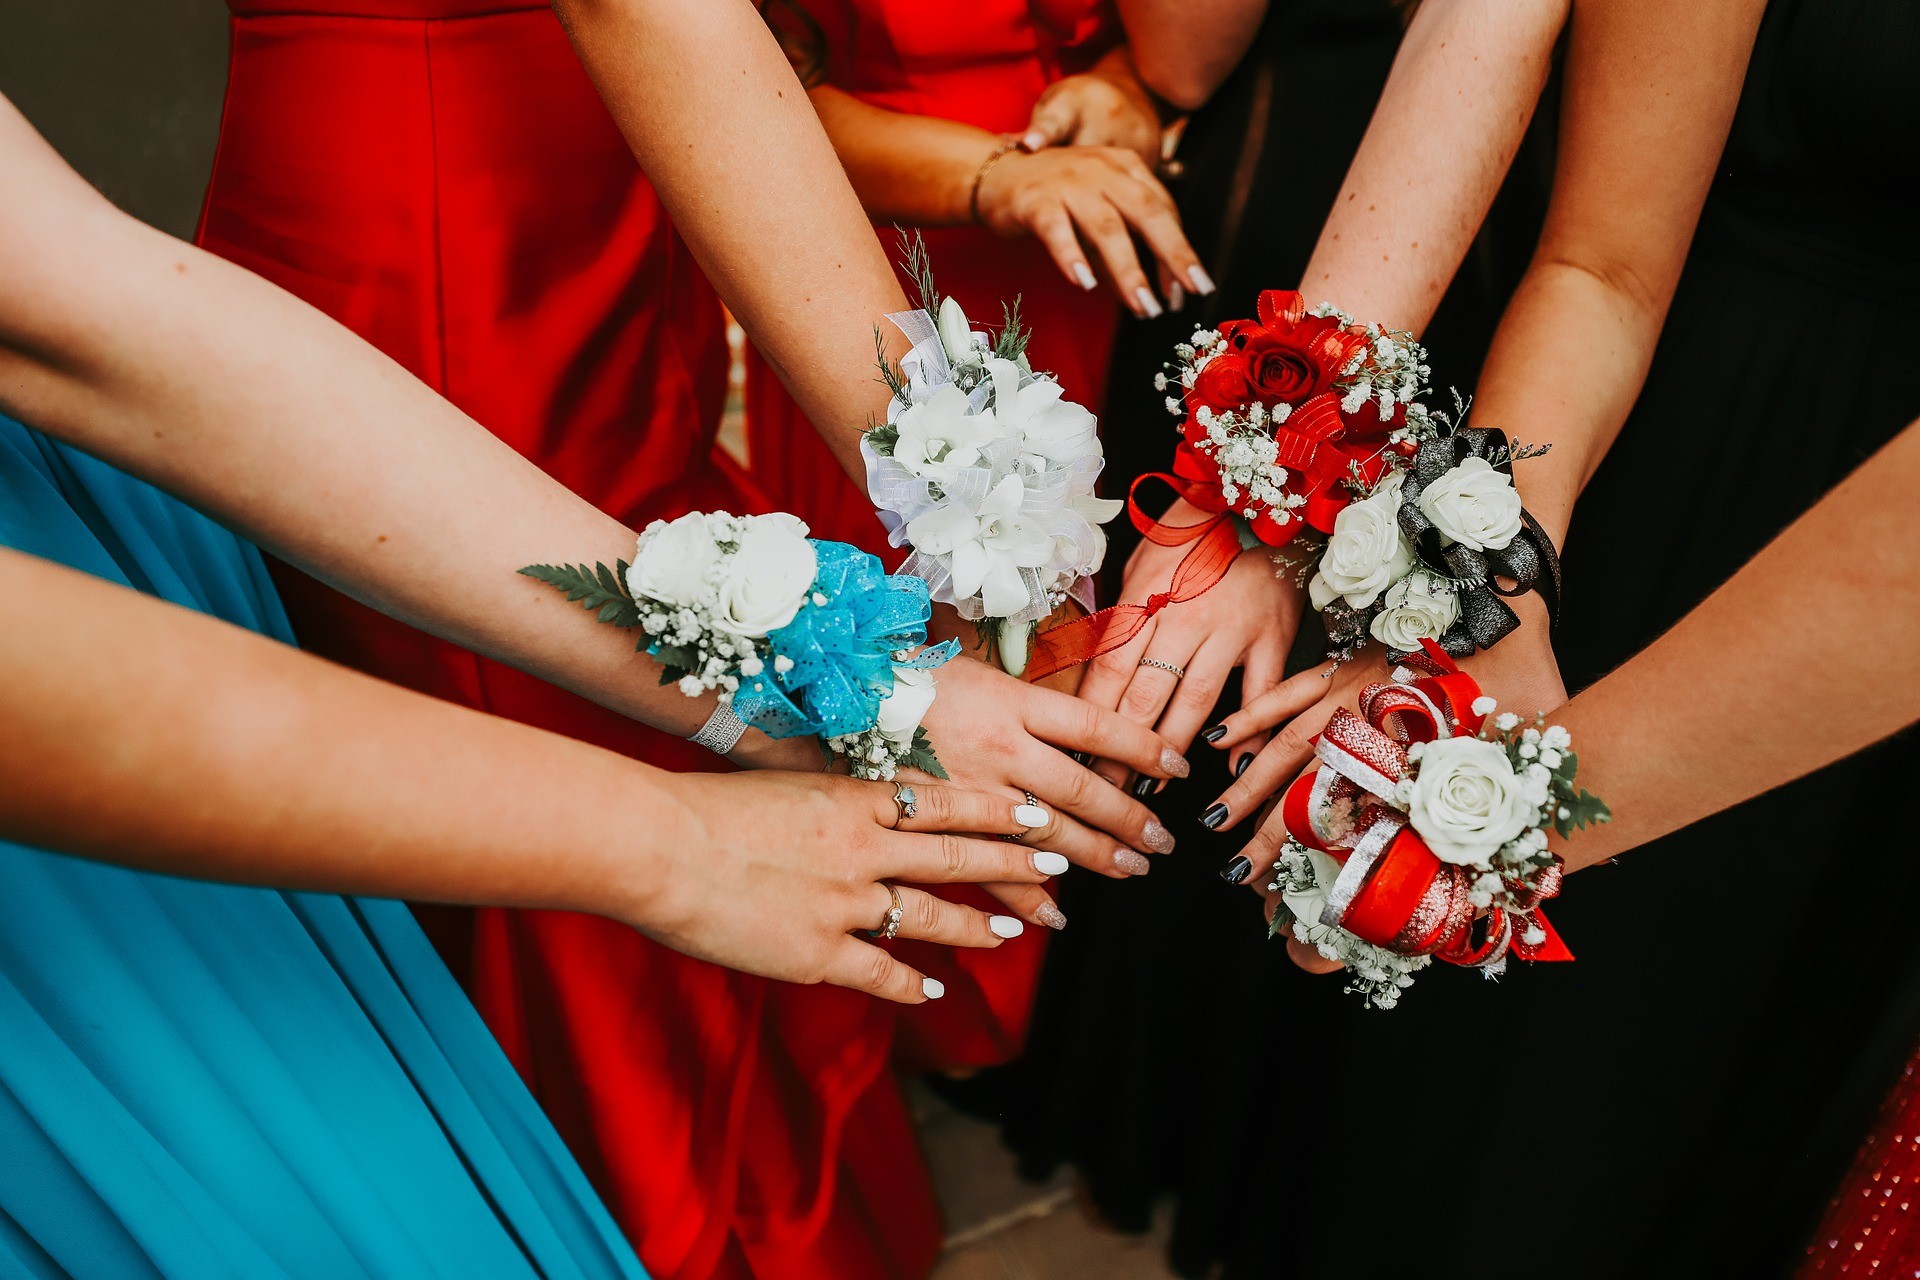 Nail Art and More - Prom Nail Art that works amazing with any looks🤩 from prom  dress to everyday outfit! Schedule your last minute beauty perk today! ☎️  973 361 0550 #randolphnj #